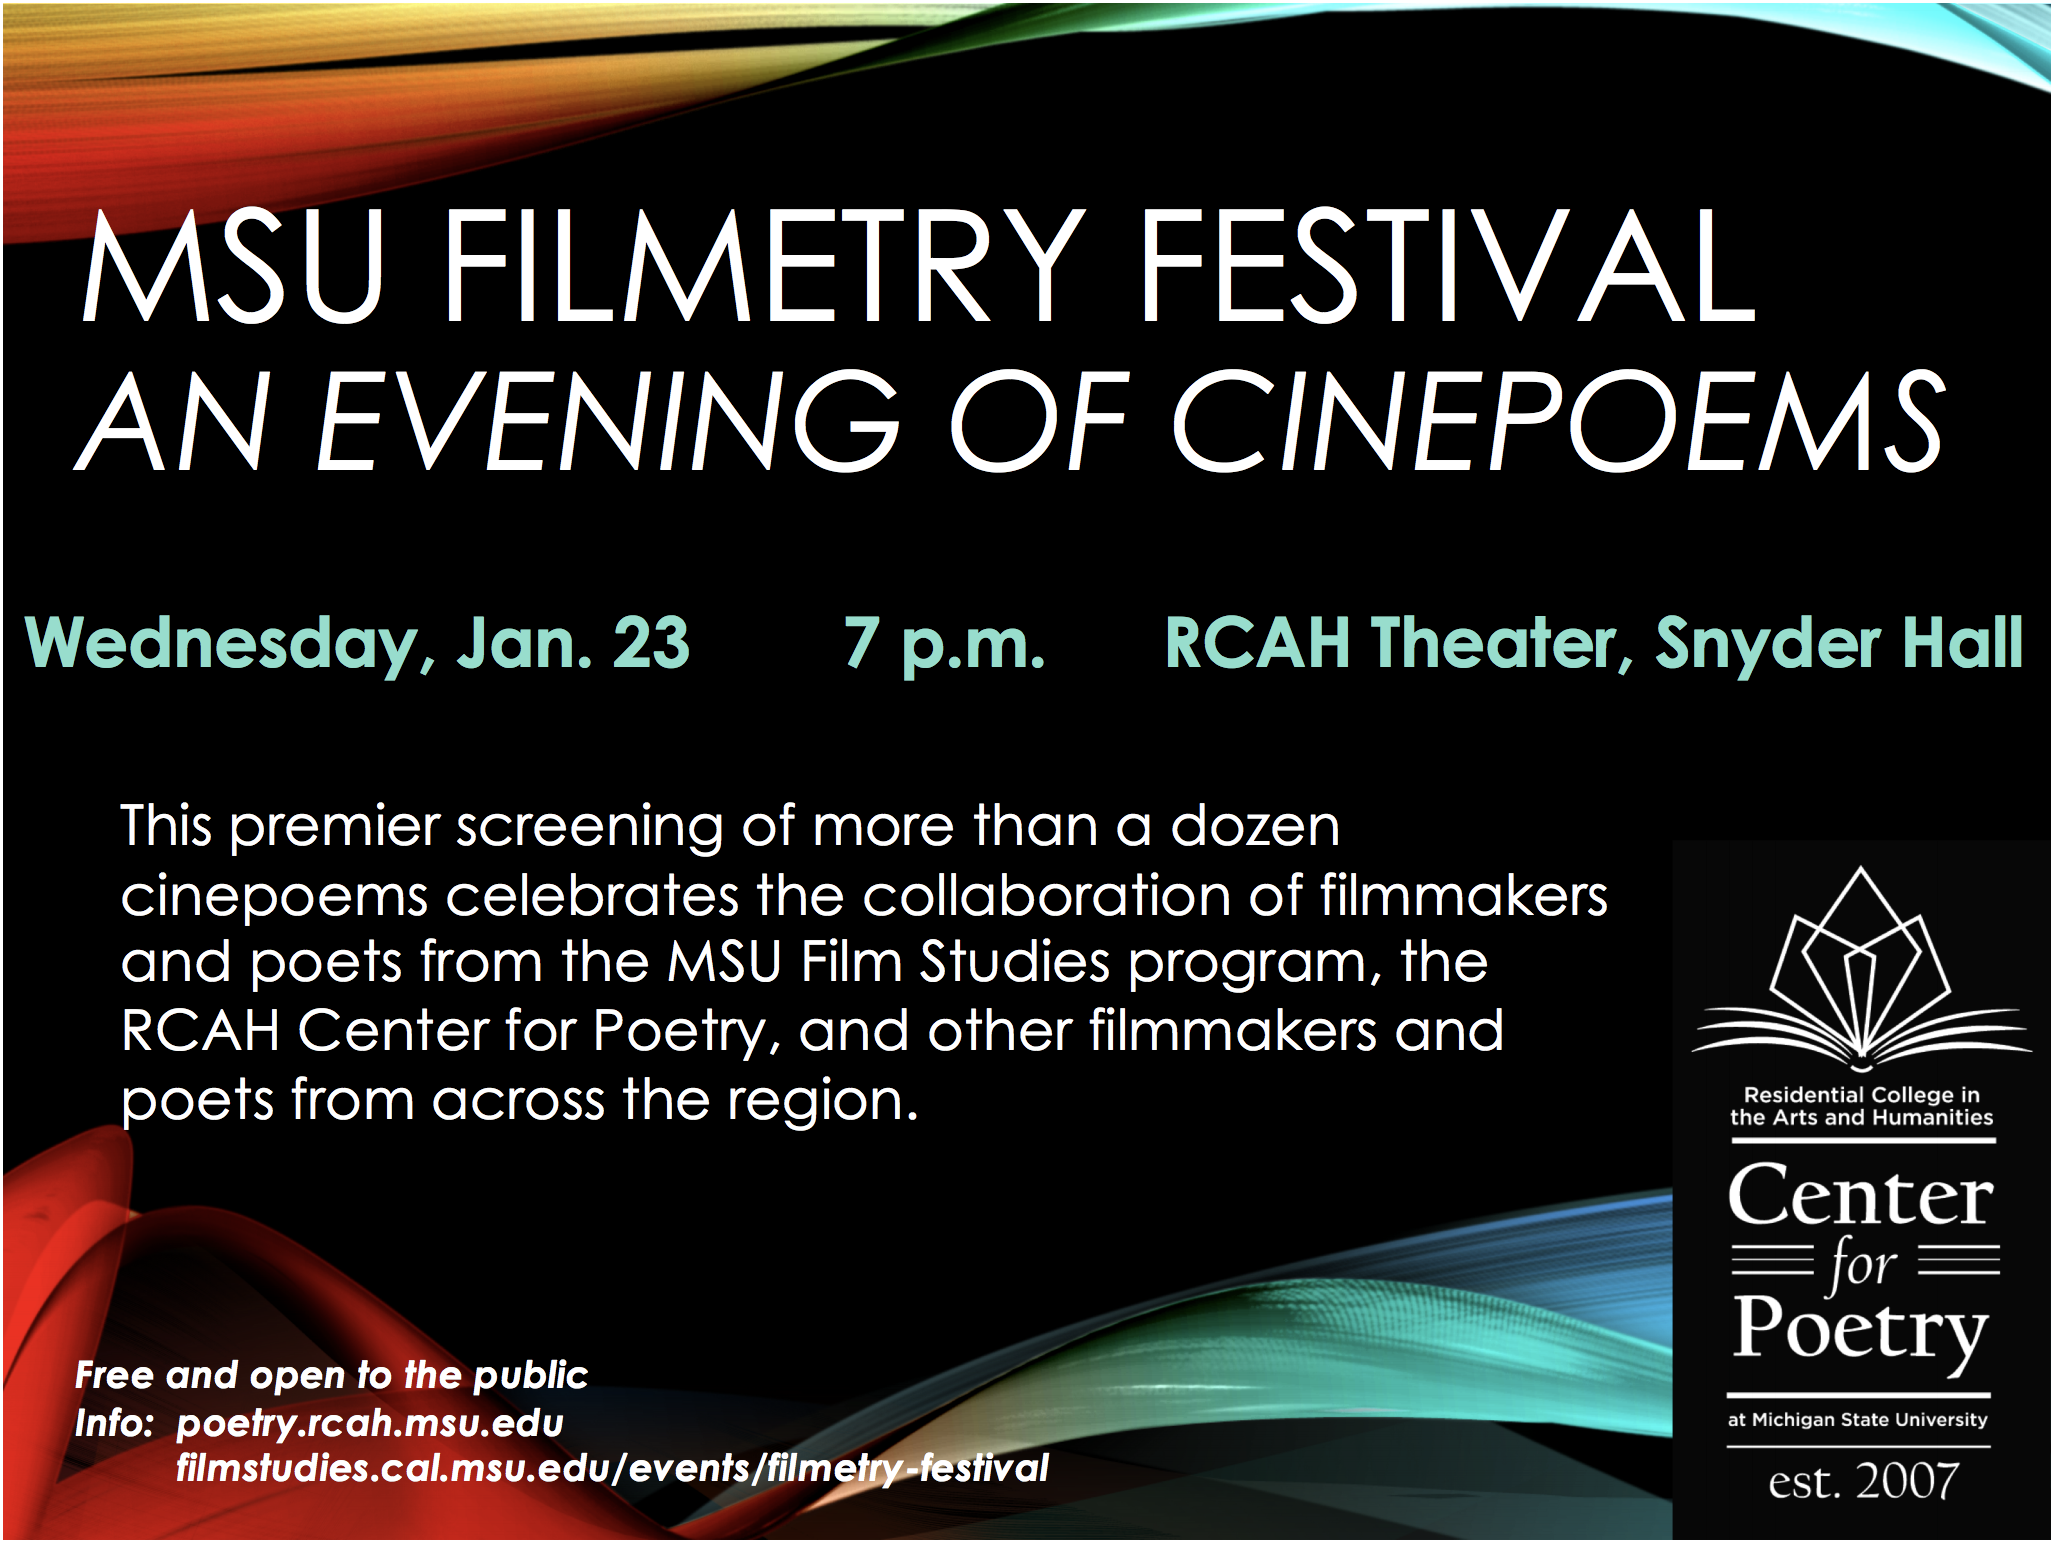 MSU Filmetry Festival: An Evening of Cinepoems @ RCAH Theater, Snyder Hall Basement | East Lansing | Michigan | United States